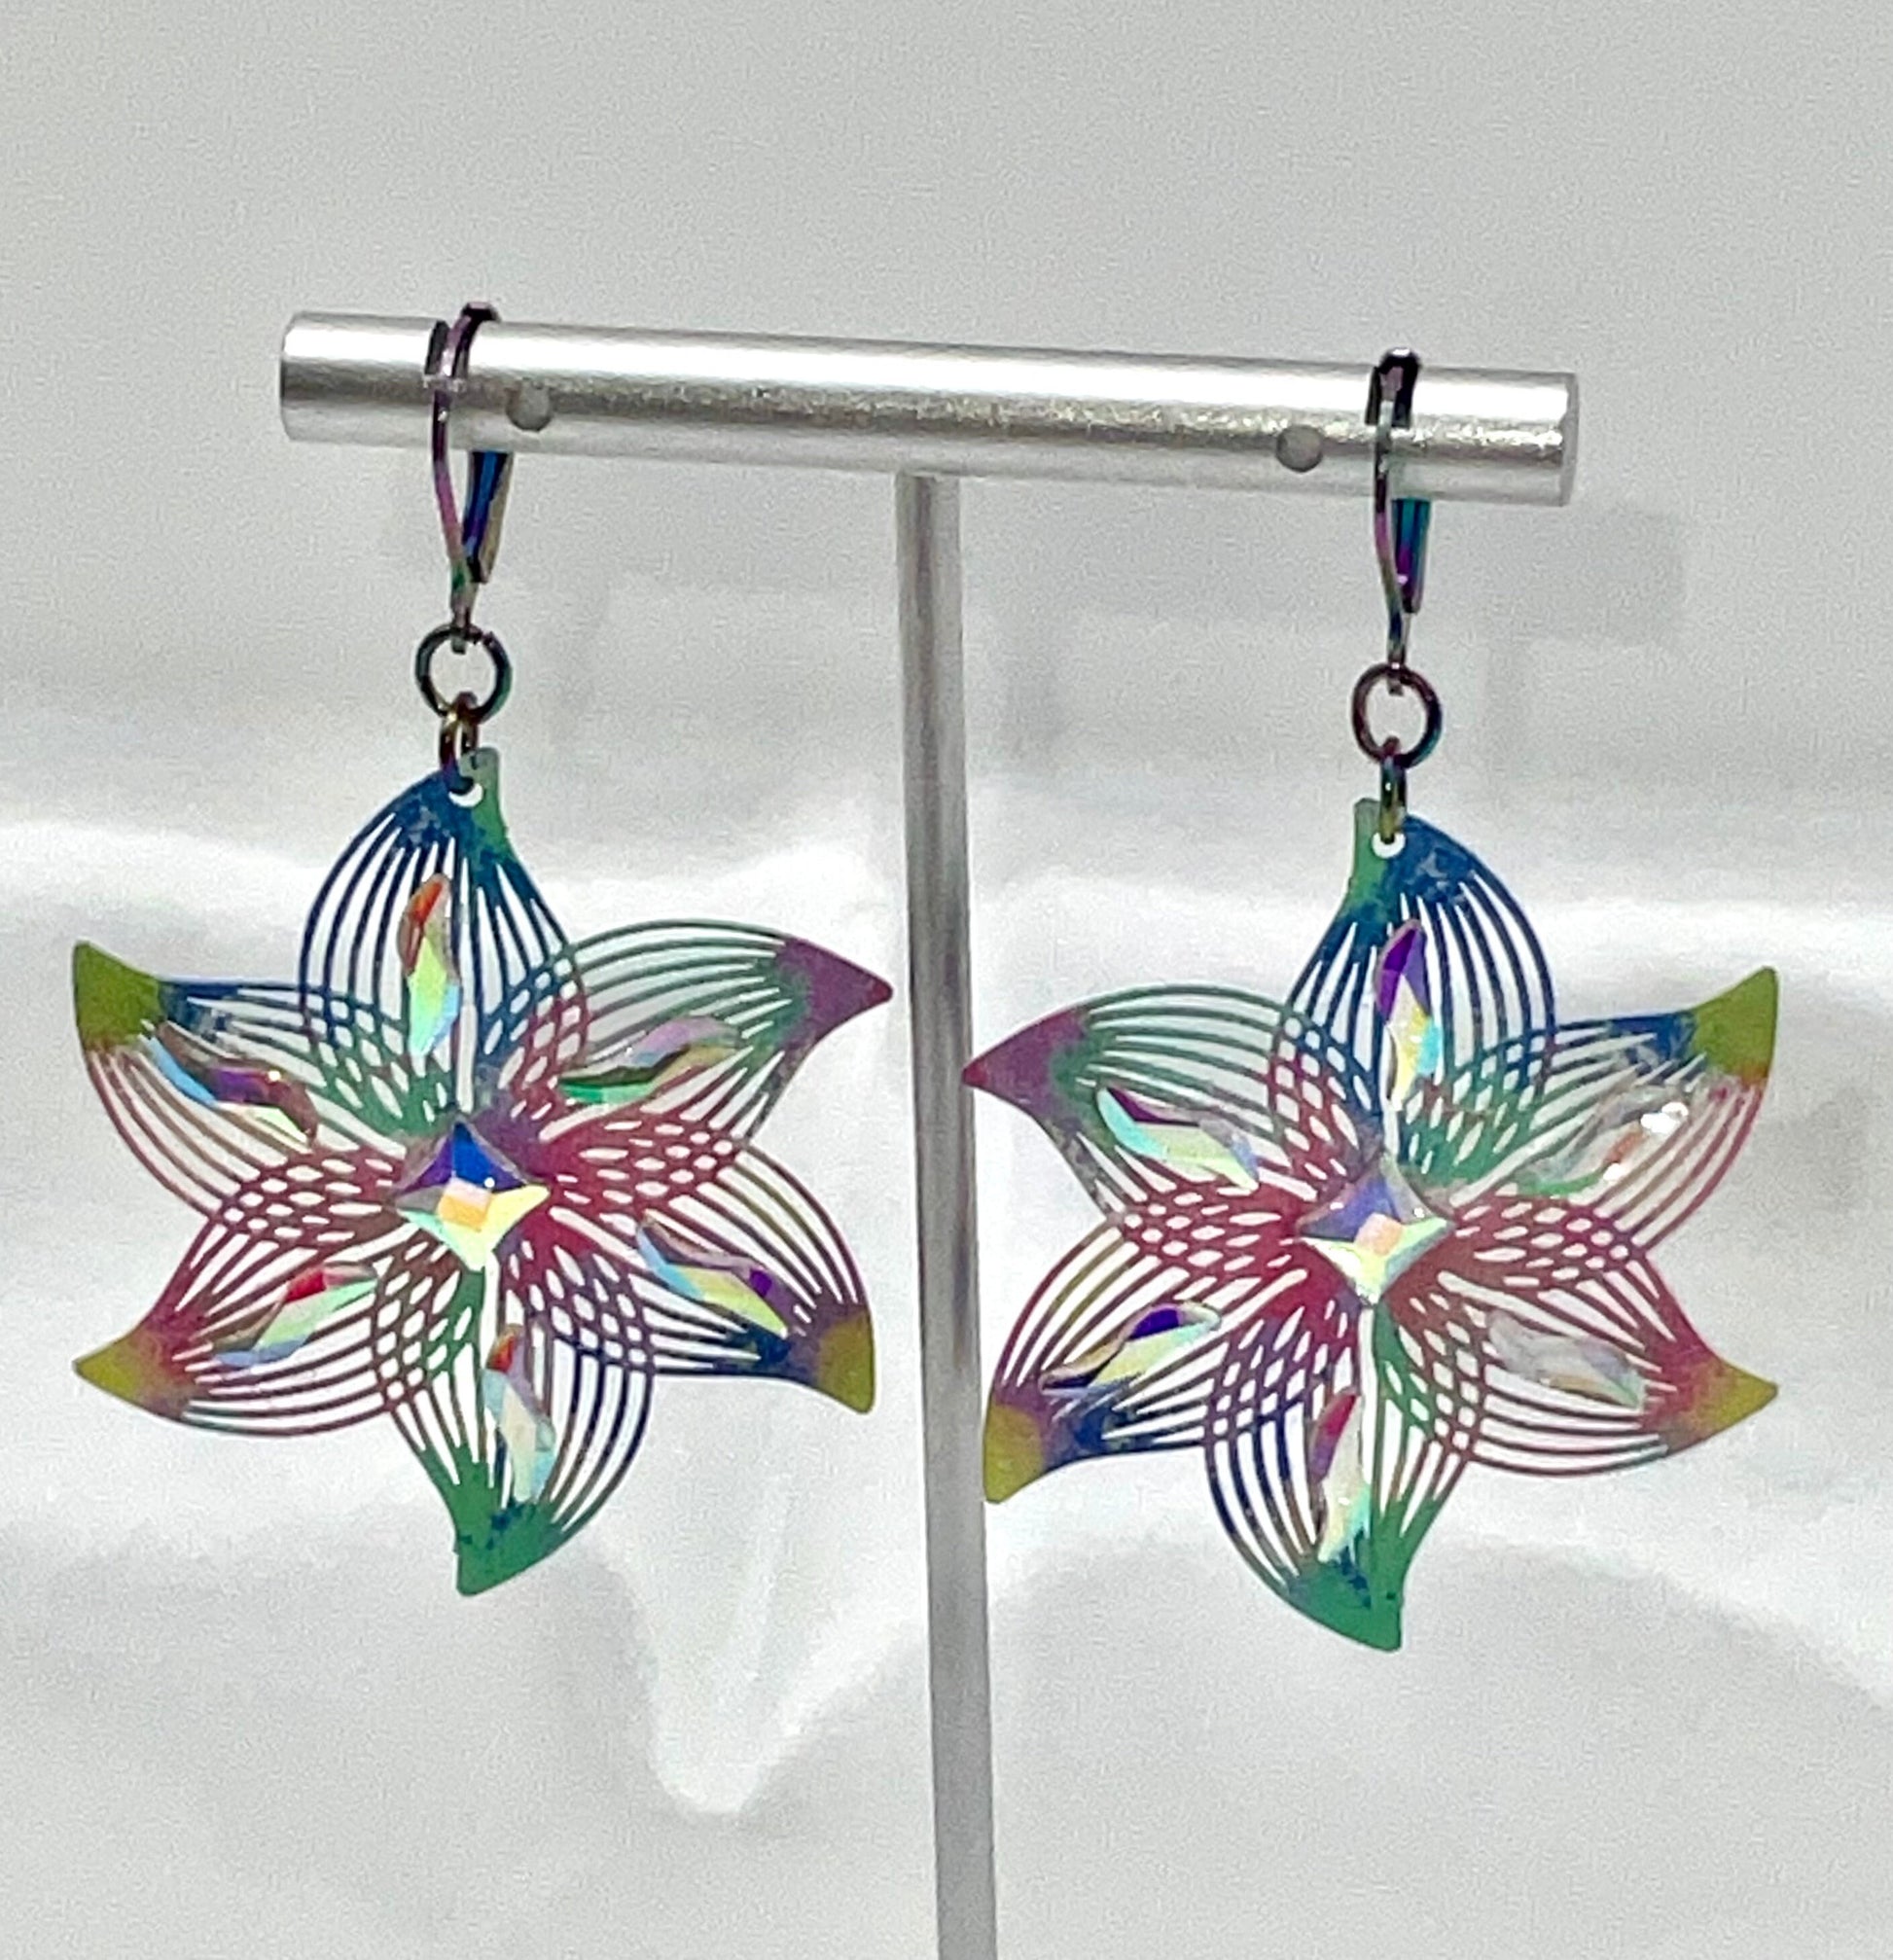 Star Shaped Rainbow Dangle Earrings with AB Crystal Accents